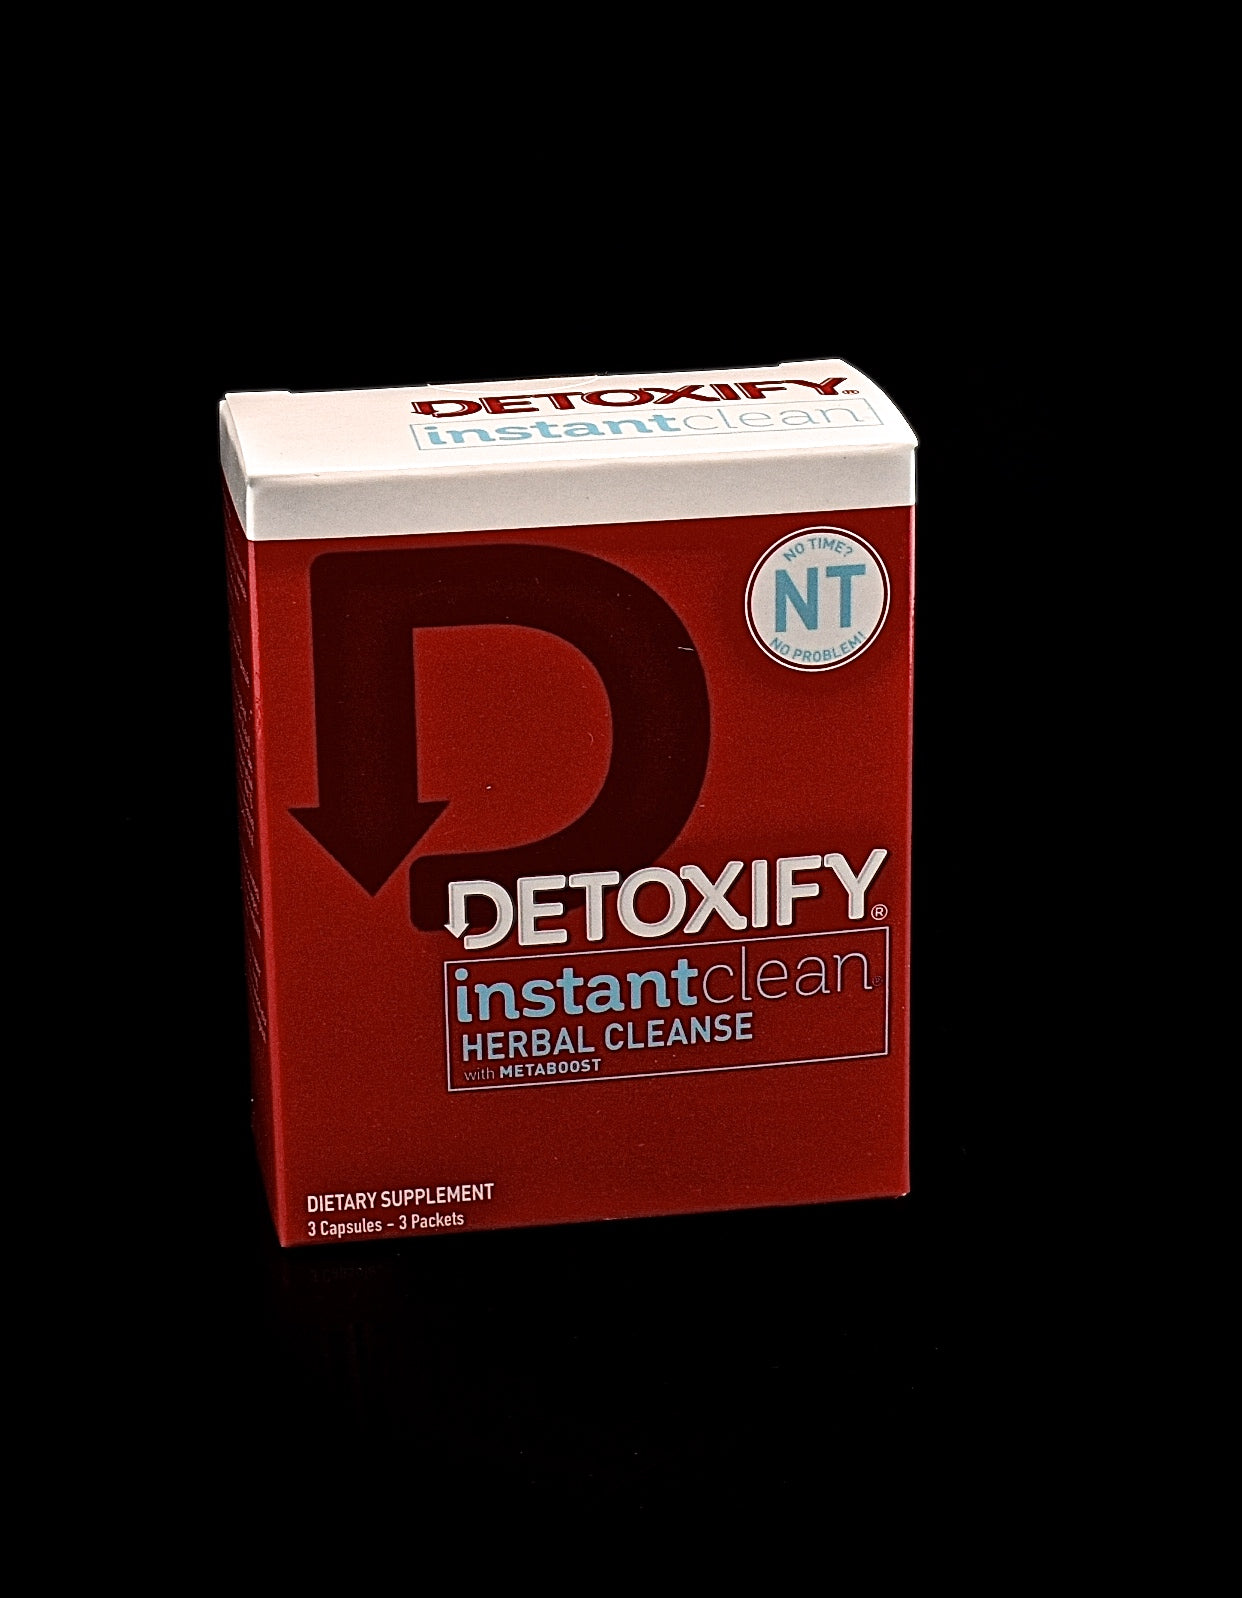 Detoxify Instant Clean | Instant Clean Herbal Cleanse with METABOOST-525